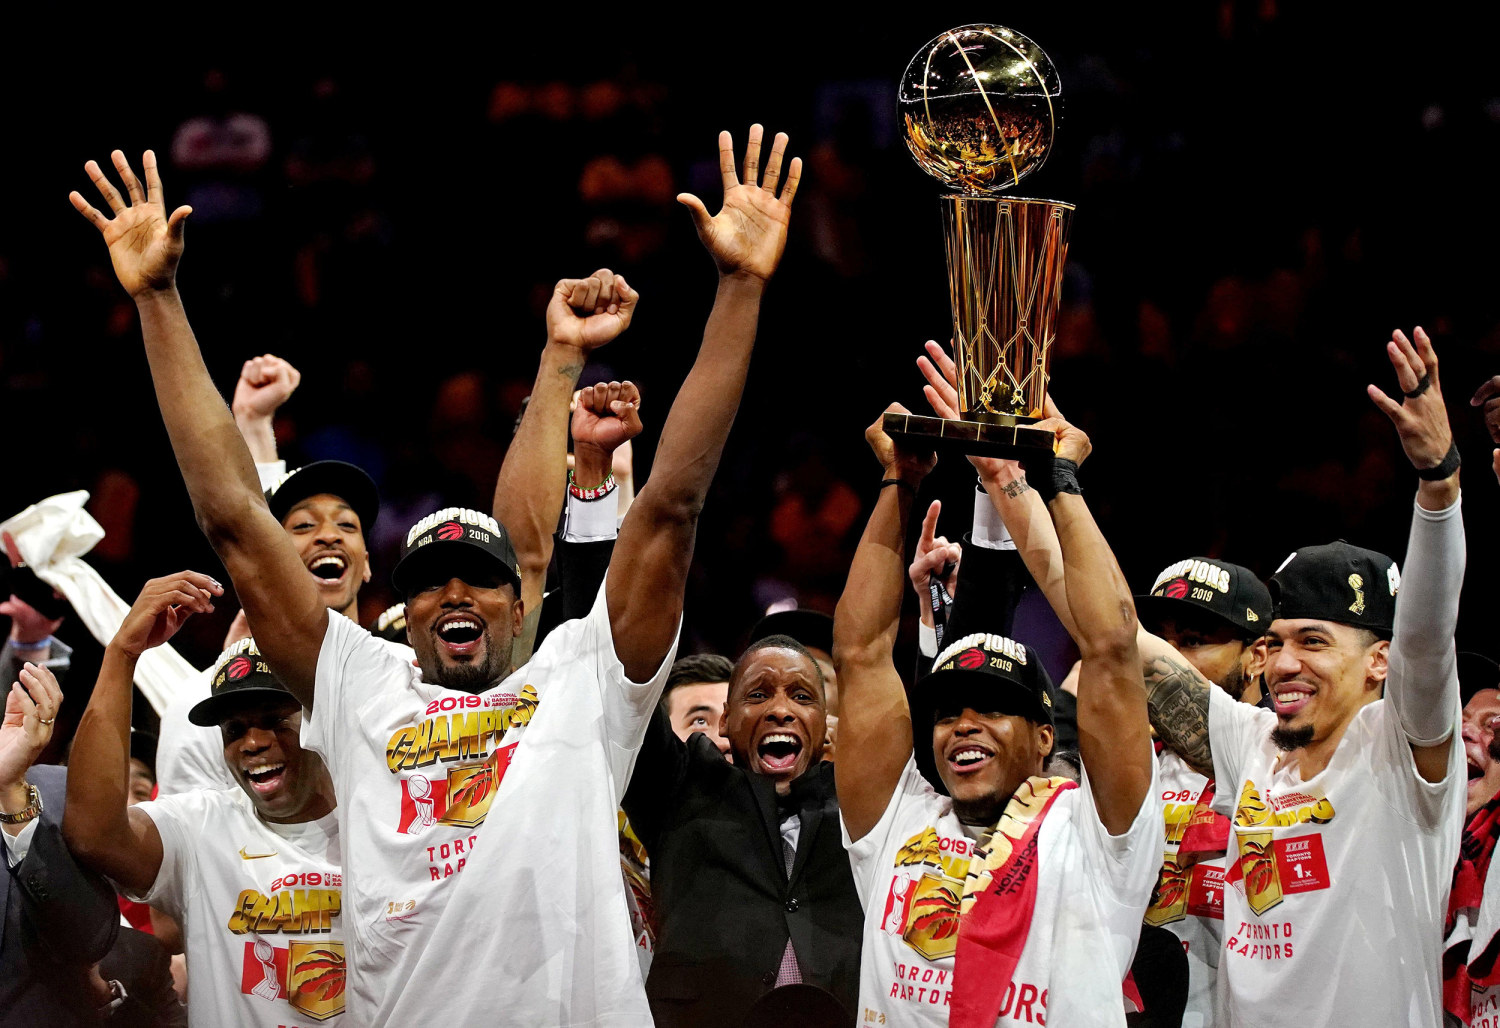 From LeBronto to Champions: The Impossible Toronto Raptors Title Run 